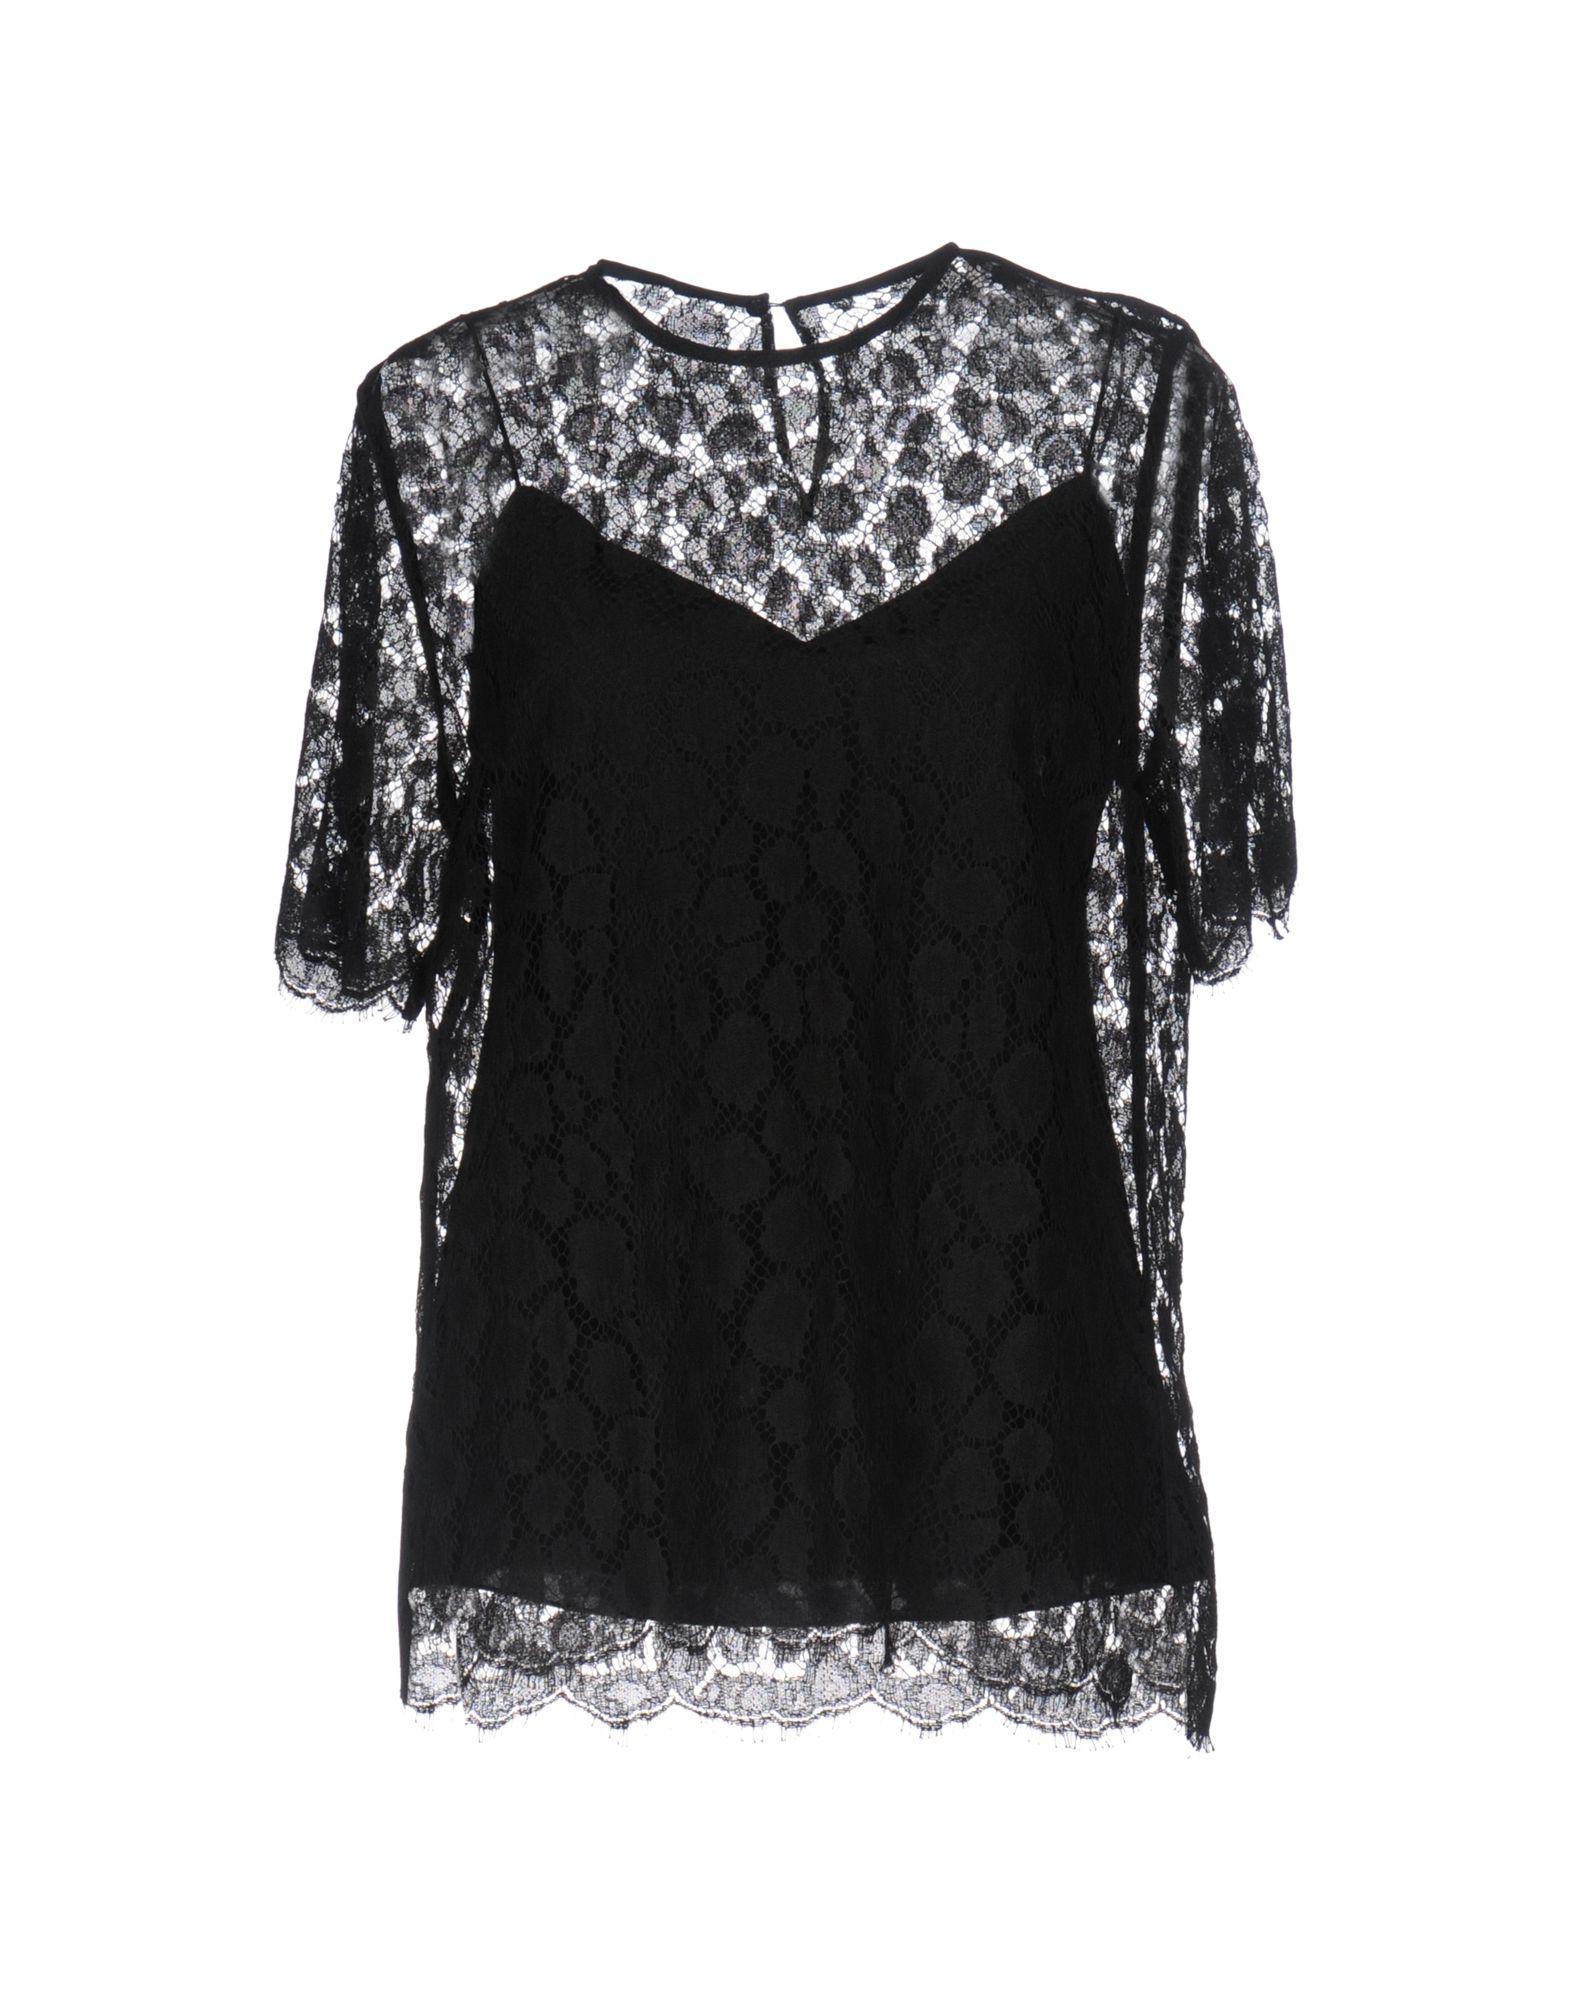 Max Mara Lace Blouse in Black - Lyst